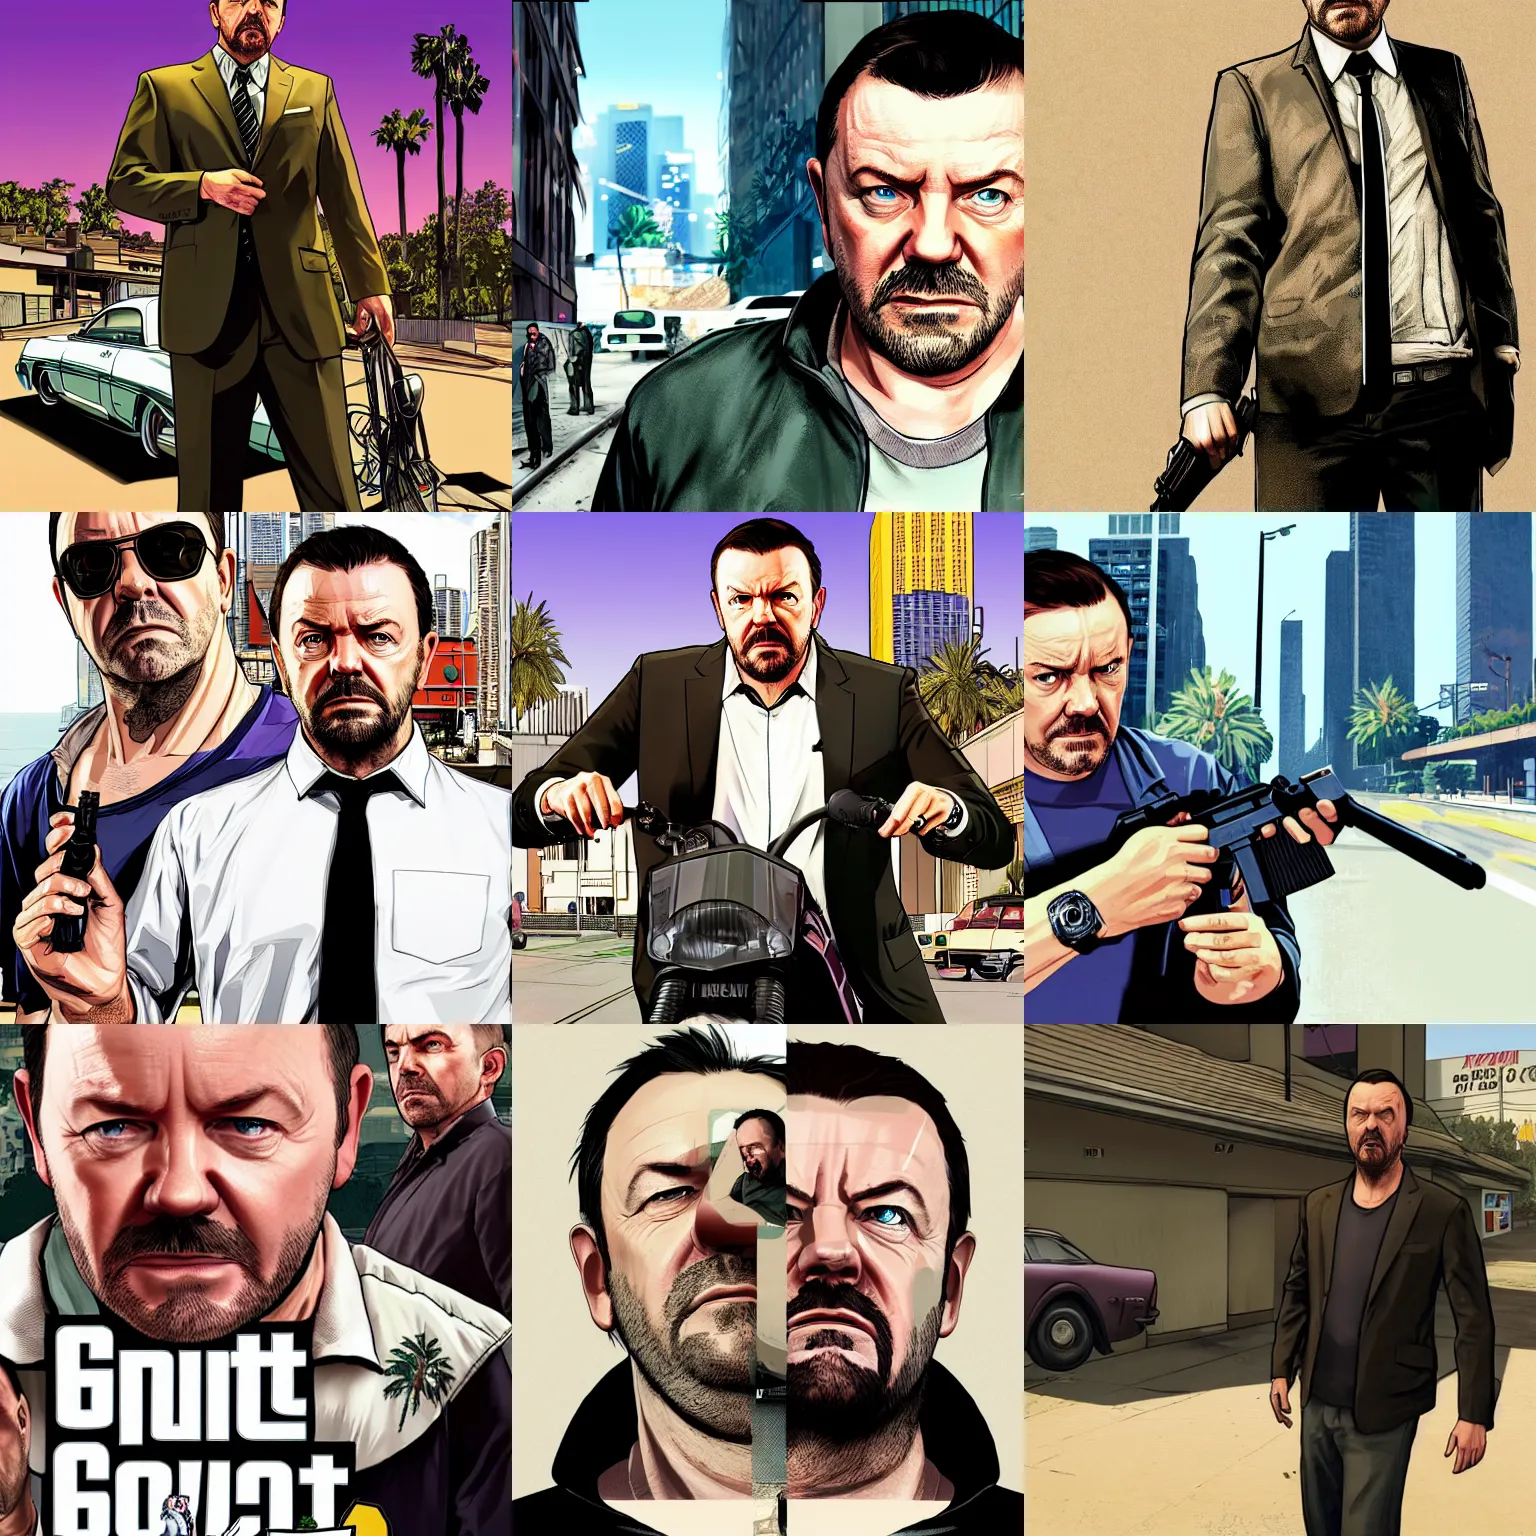 Prompt: ricky gervais in gta v promotional art by stephen bliss, no text